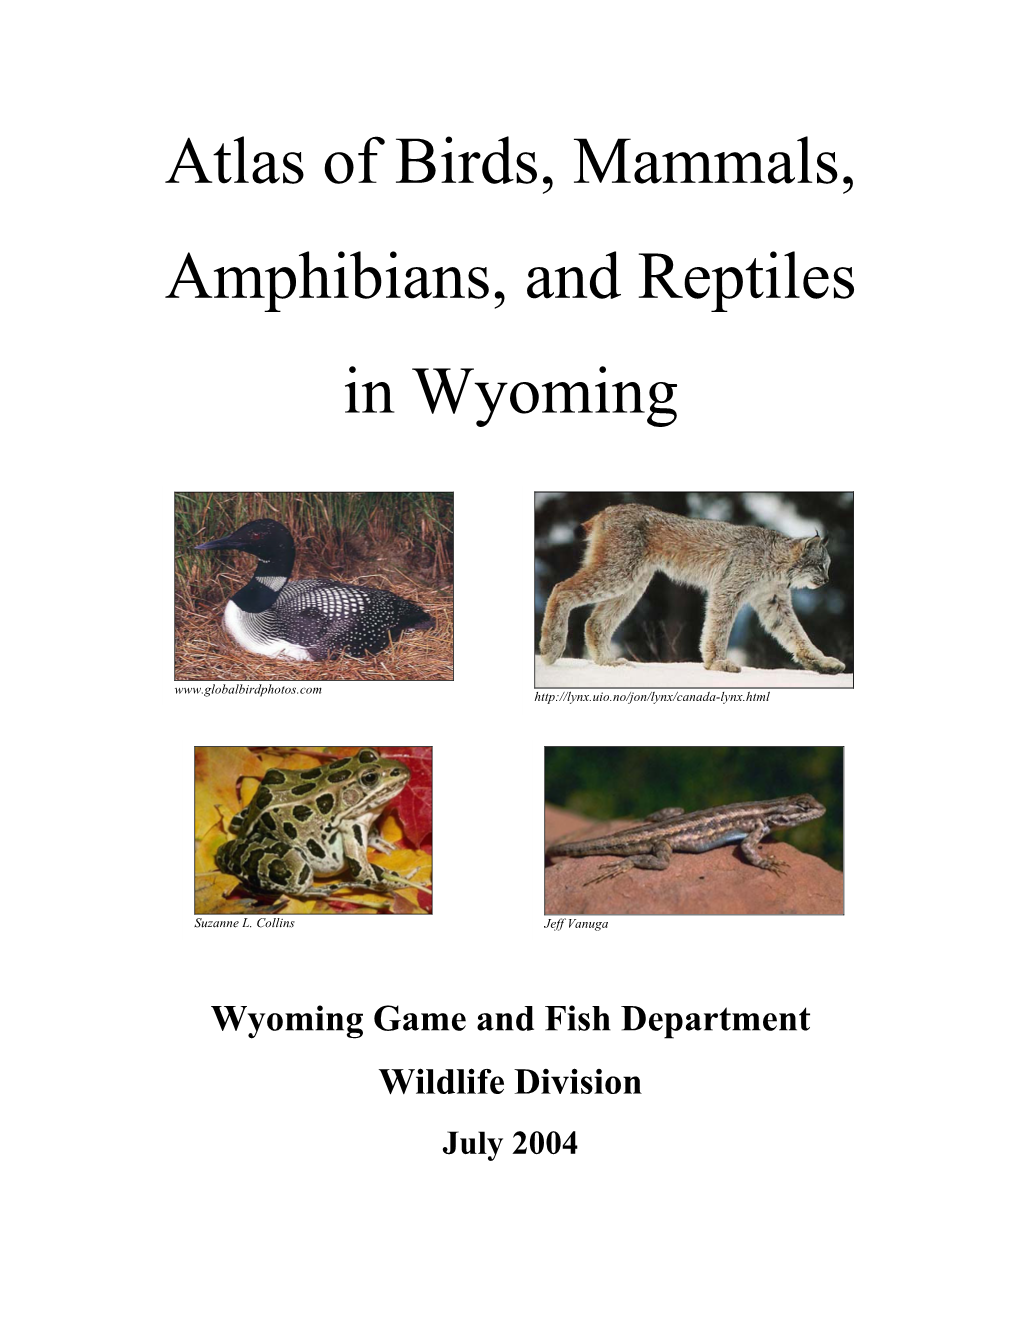 Atlas of Birds, Mammals, Amphibians, and Reptiles in Wyoming. Wyoming Game and Fish Department Nongame Program, Lander